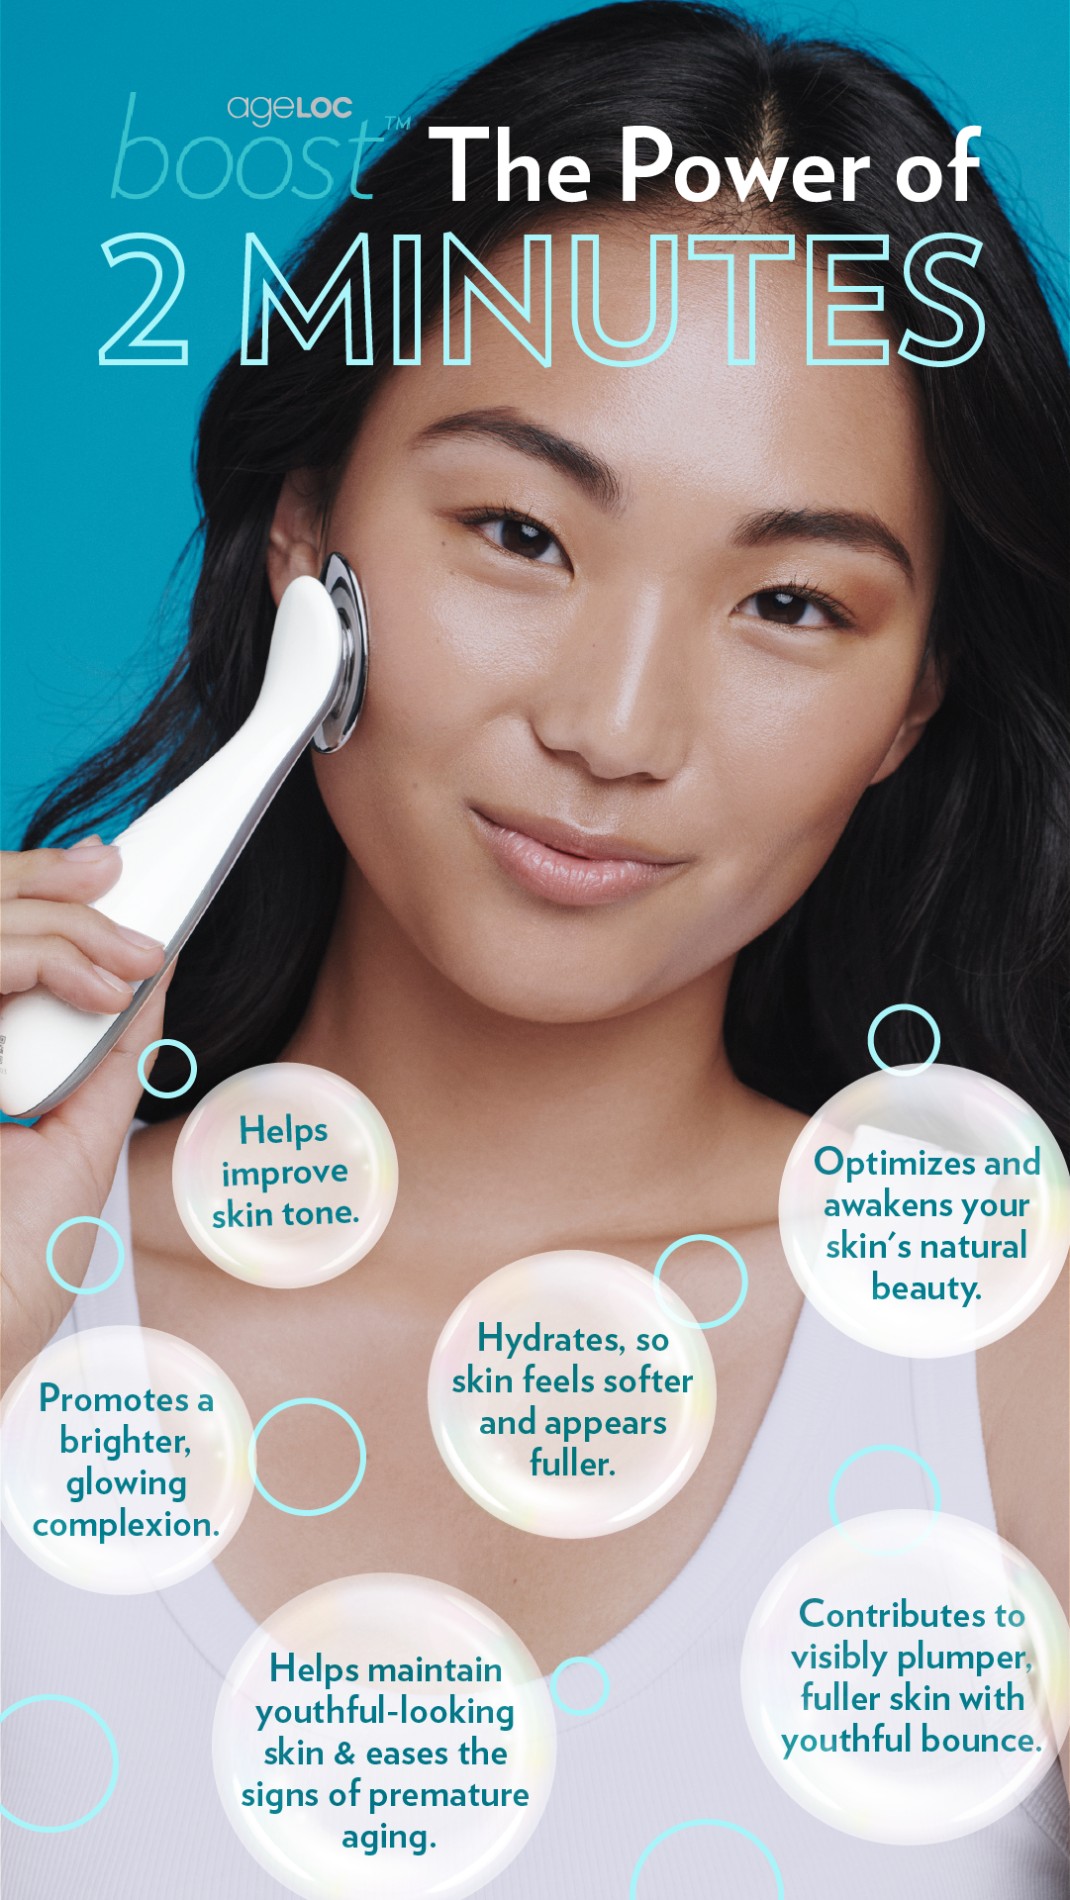 ageLOC Boost provides several benefits when incorporated into your skin care routine